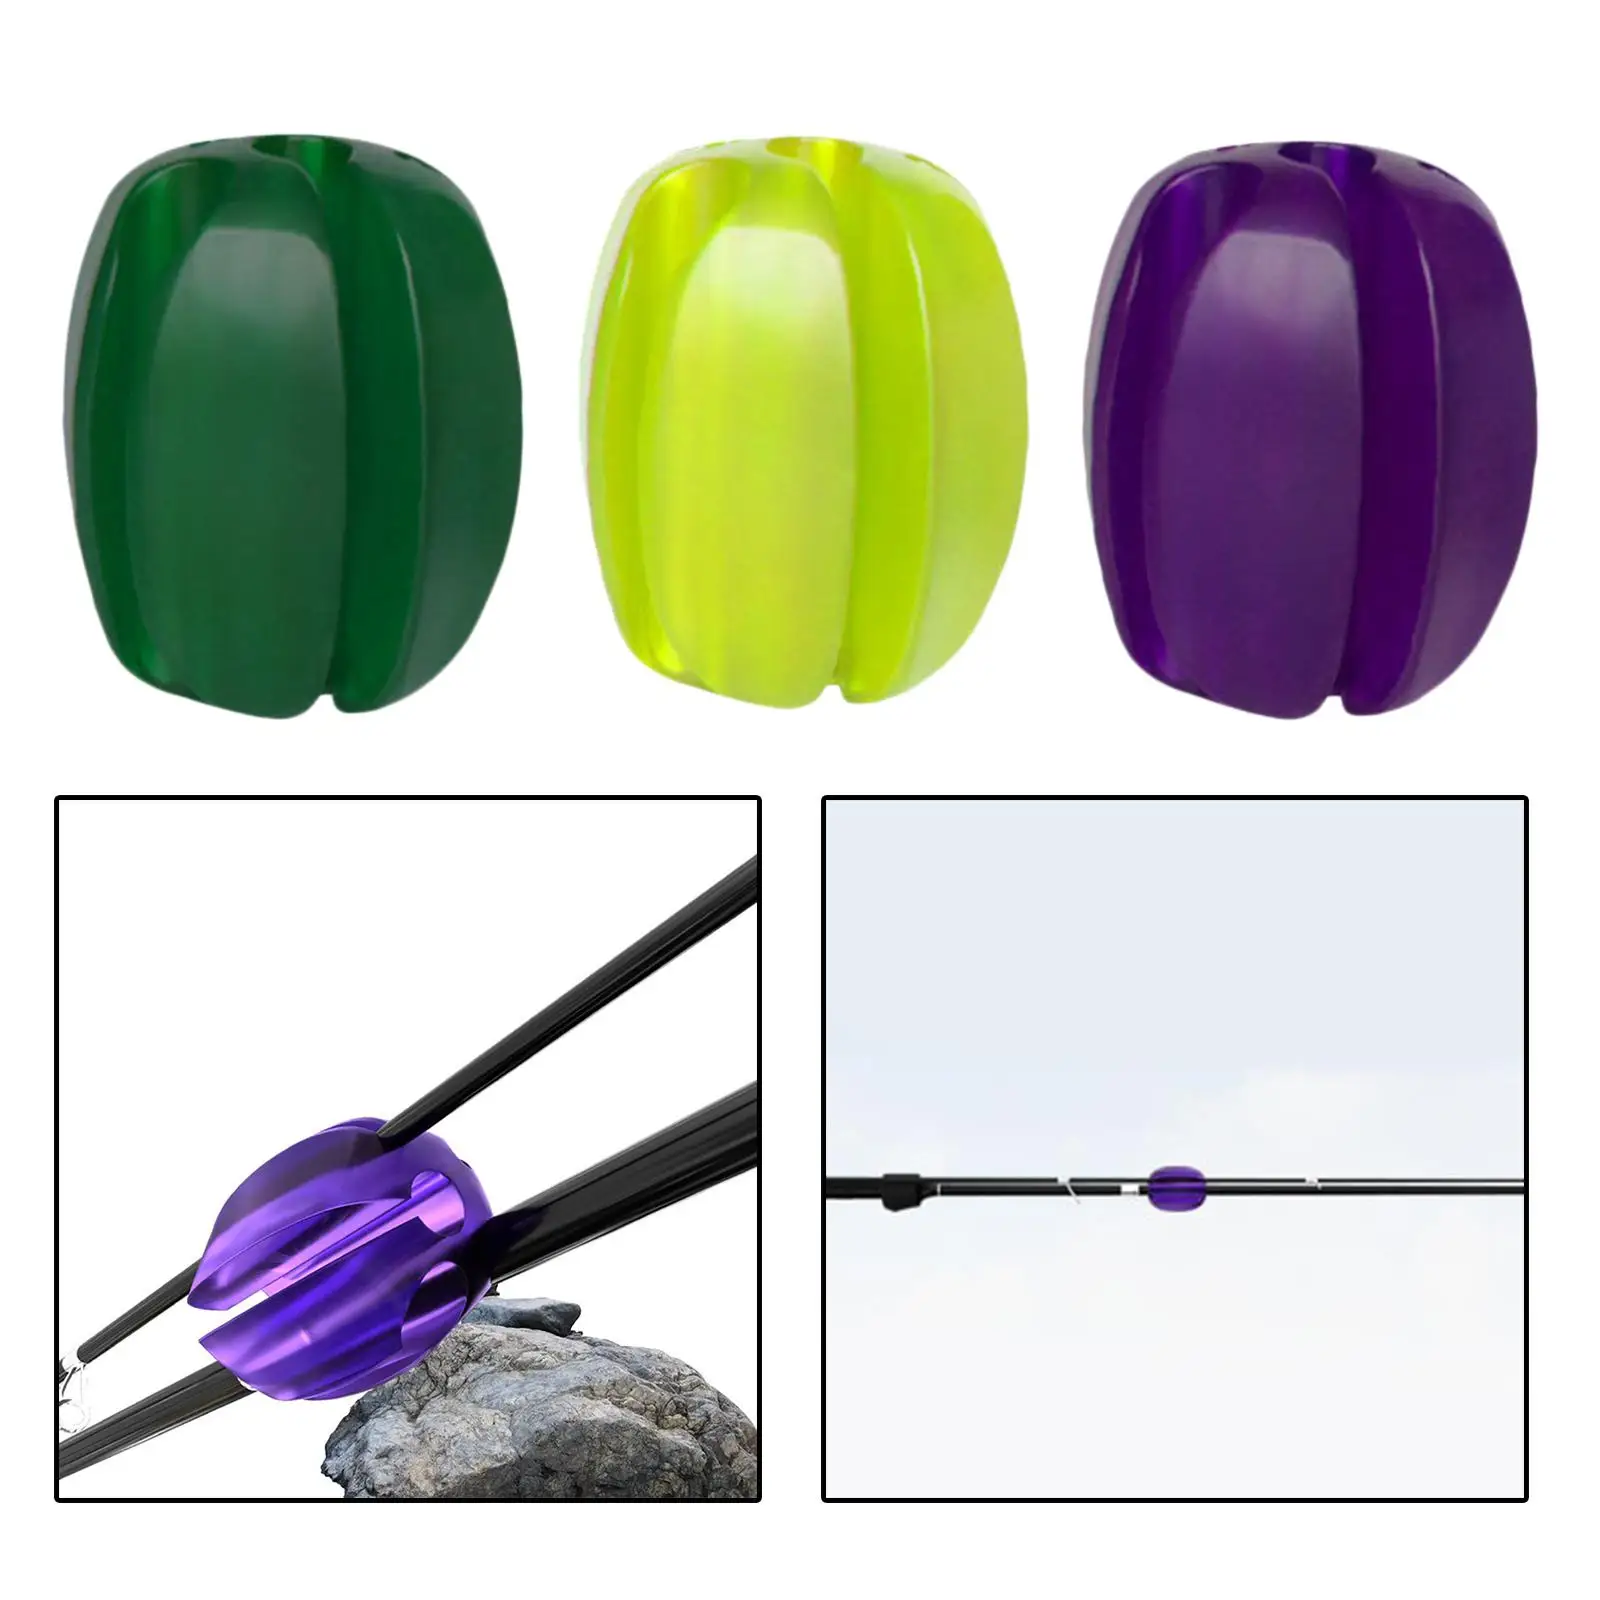 Rubber Fishing Rod Holder Jammed Protection Stop 5 Hole Tackle Supply Elastic Binding Fishing Pole Accessories DIY for Outdoor